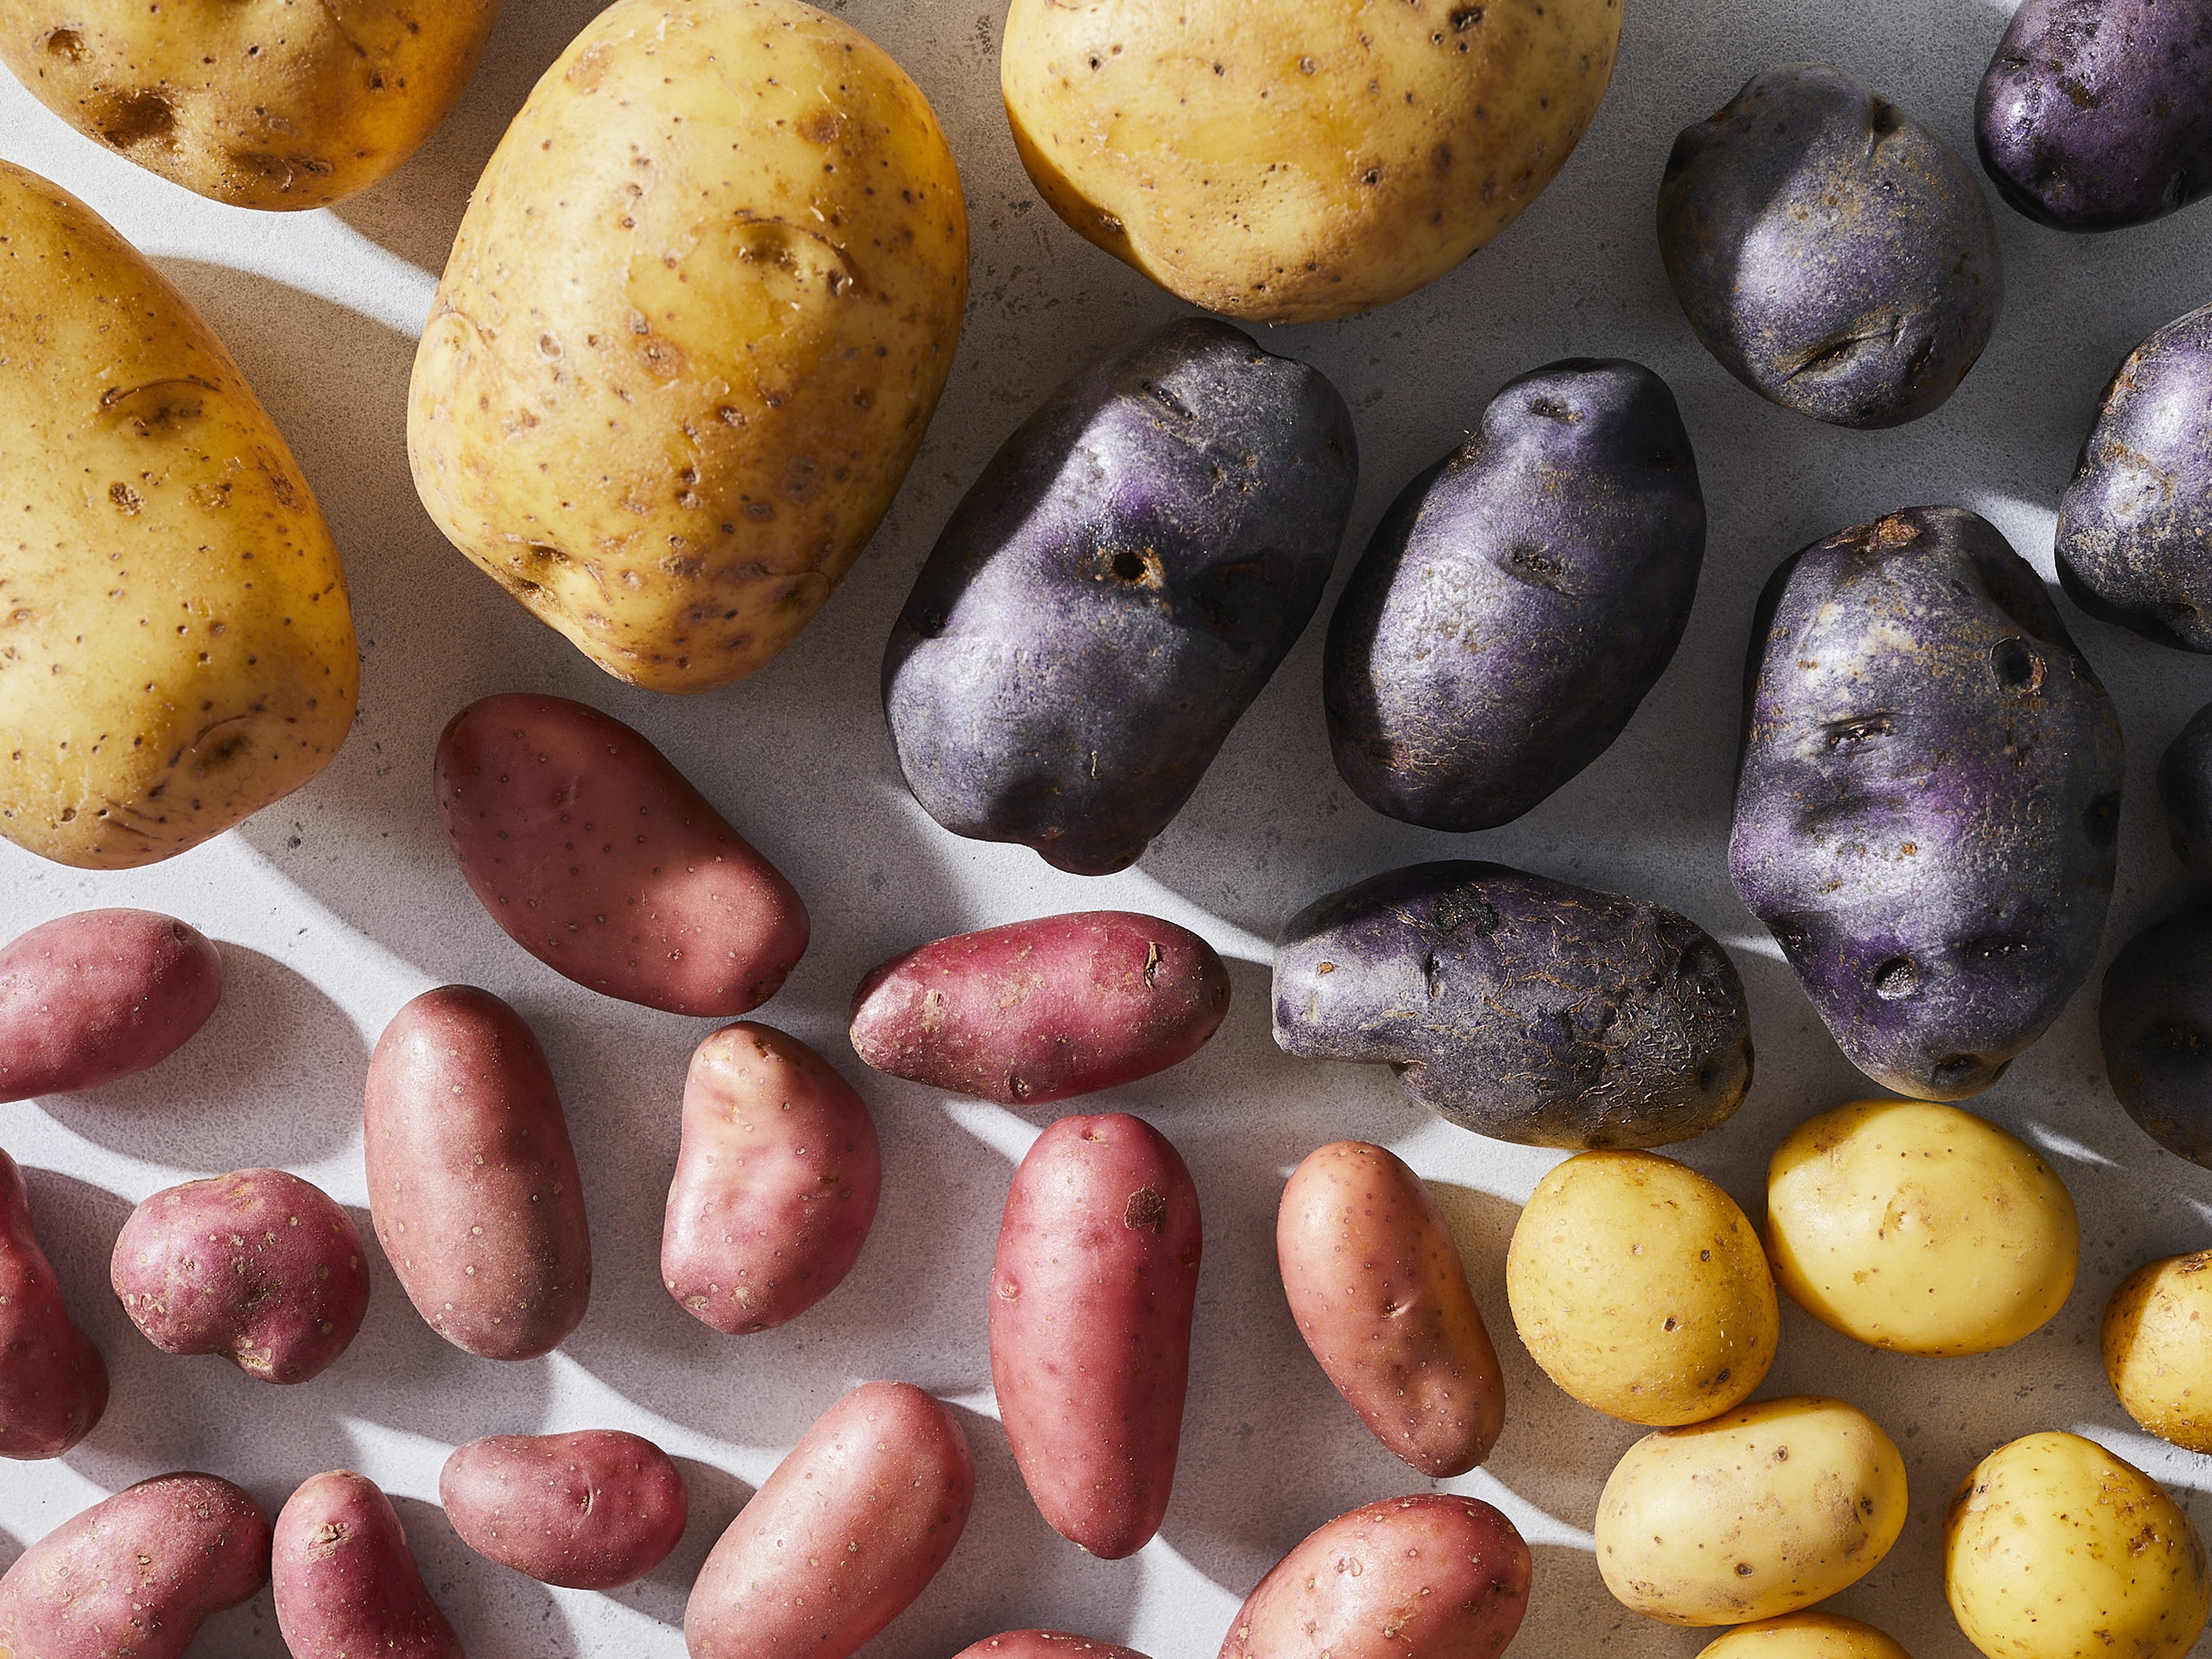 Know Your Potatoes: Choosing the Right Potato for Your Dish